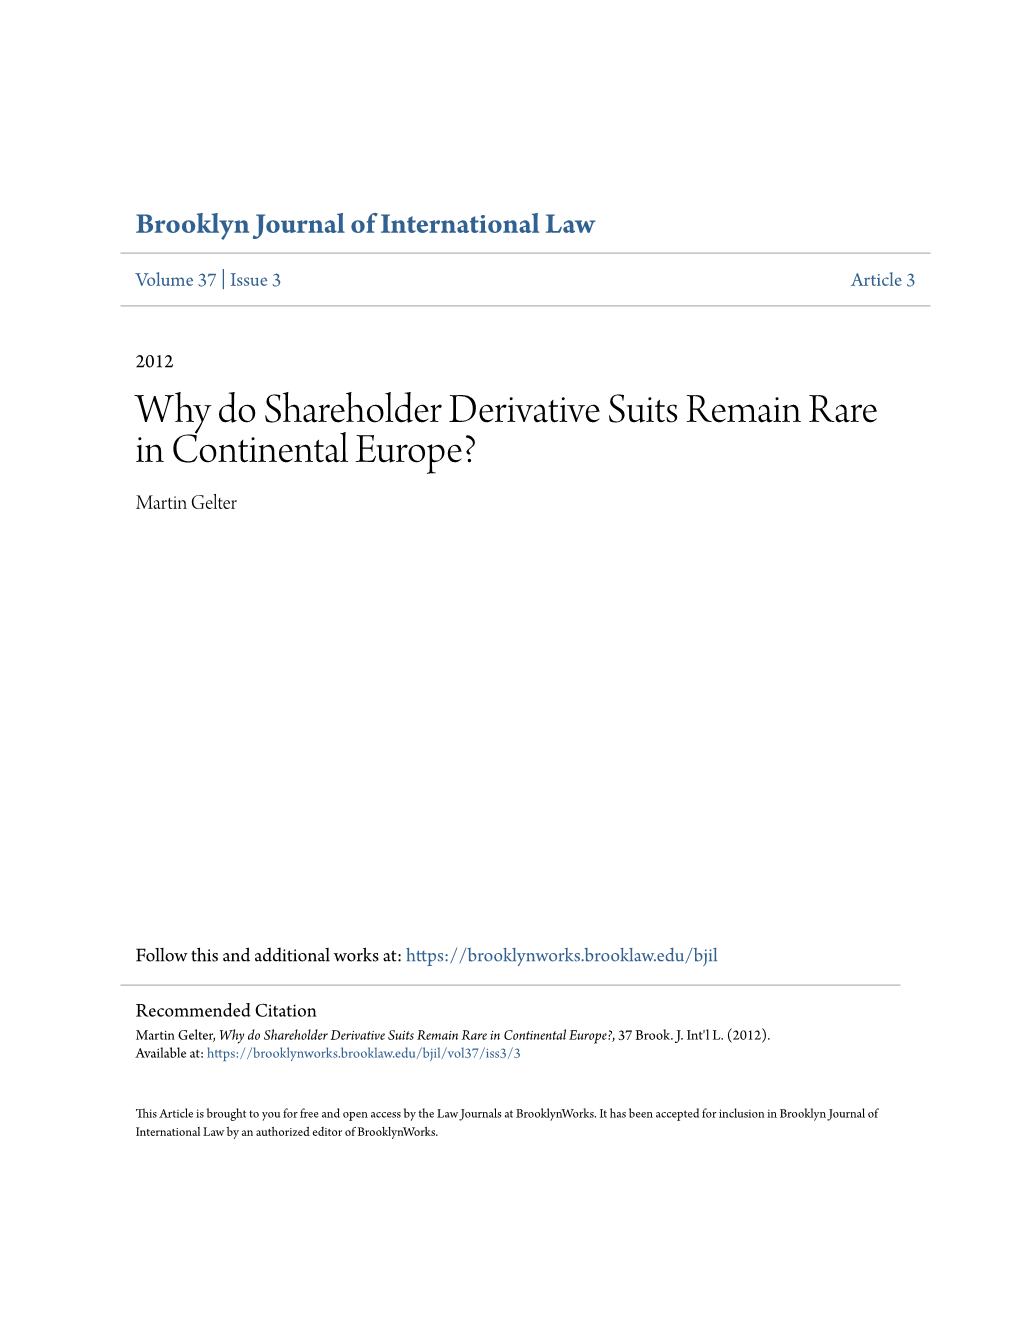 Why Do Shareholder Derivative Suits Remain Rare in Continental Europe? Martin Gelter